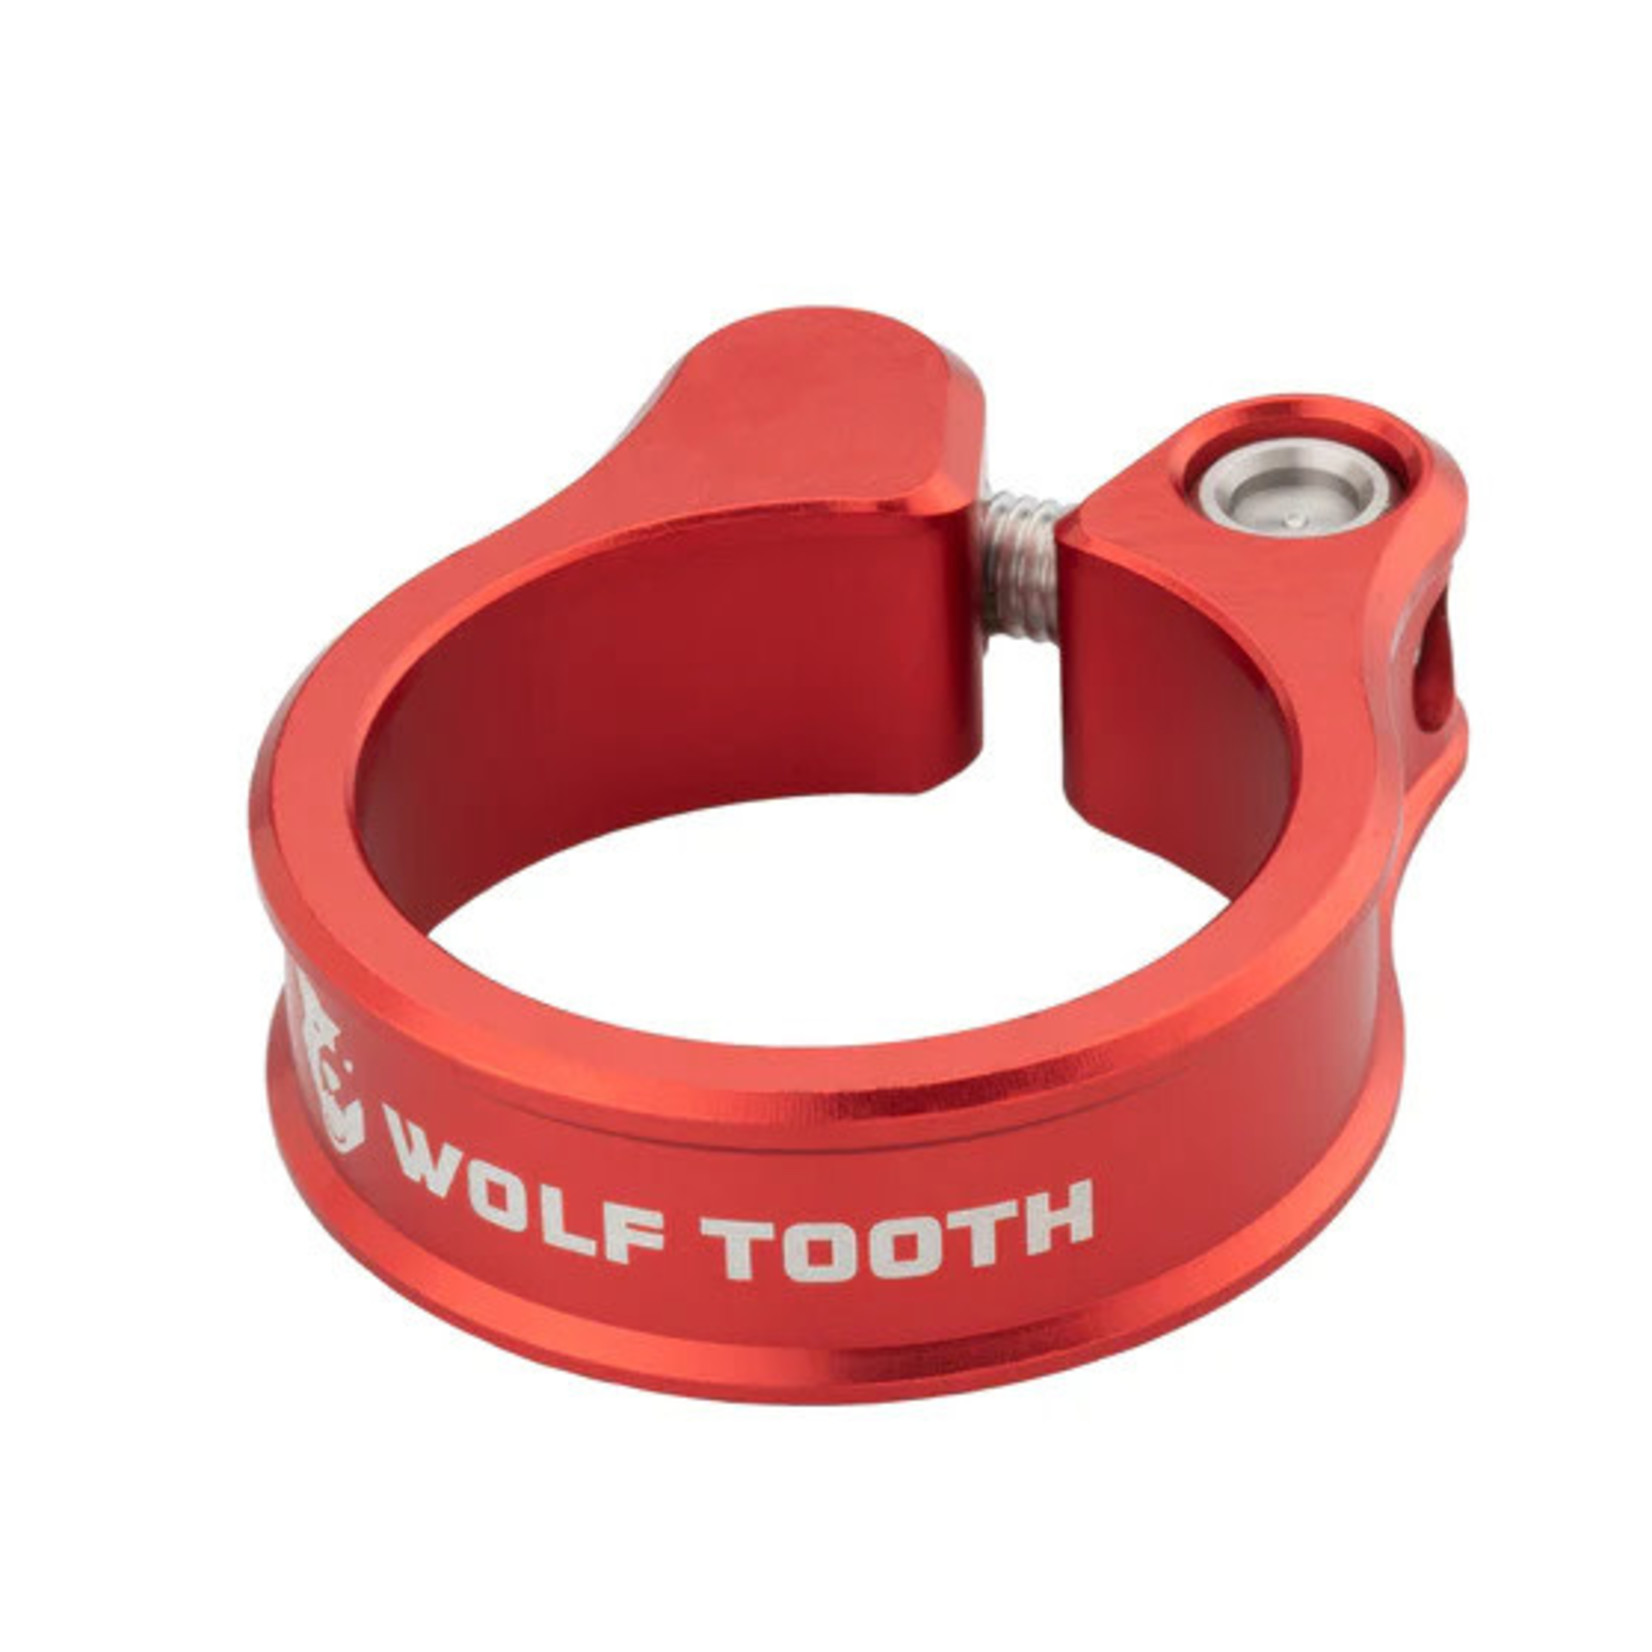 Wolf Tooth Components Wolf Tooth Seatpost Clamp